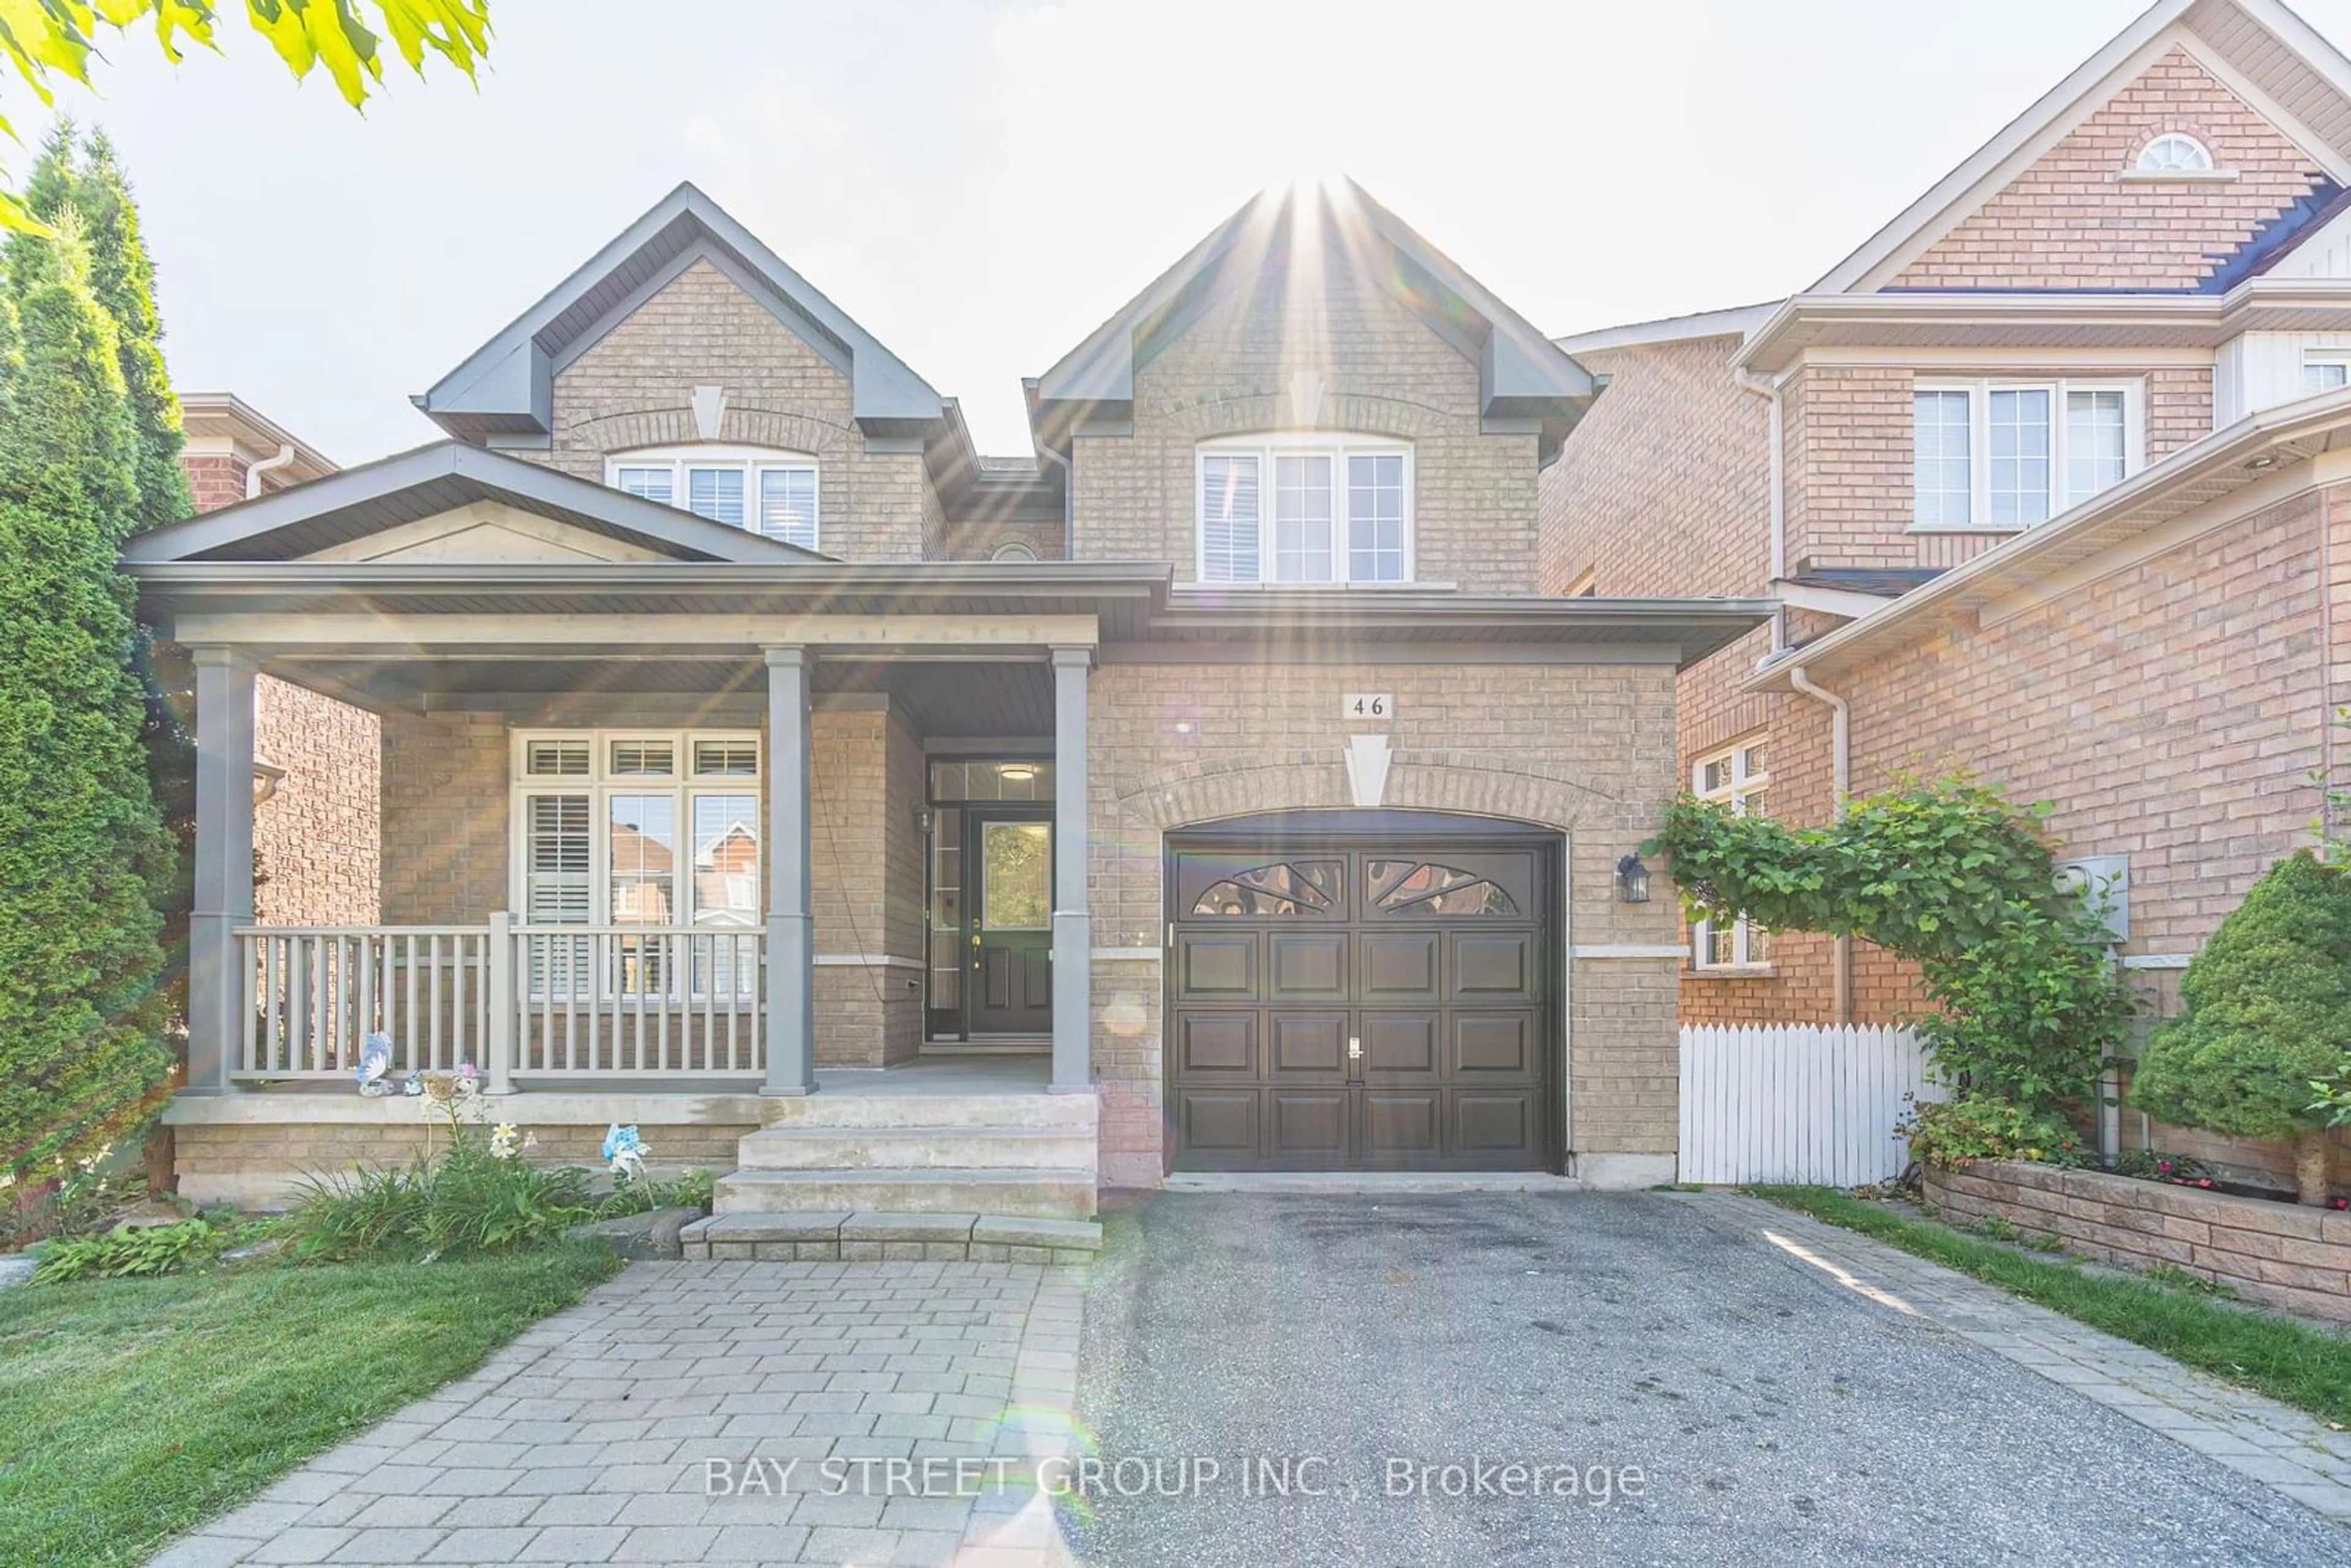 Home with brick exterior material for 46 Appleview Rd, Markham Ontario L6E 2G2